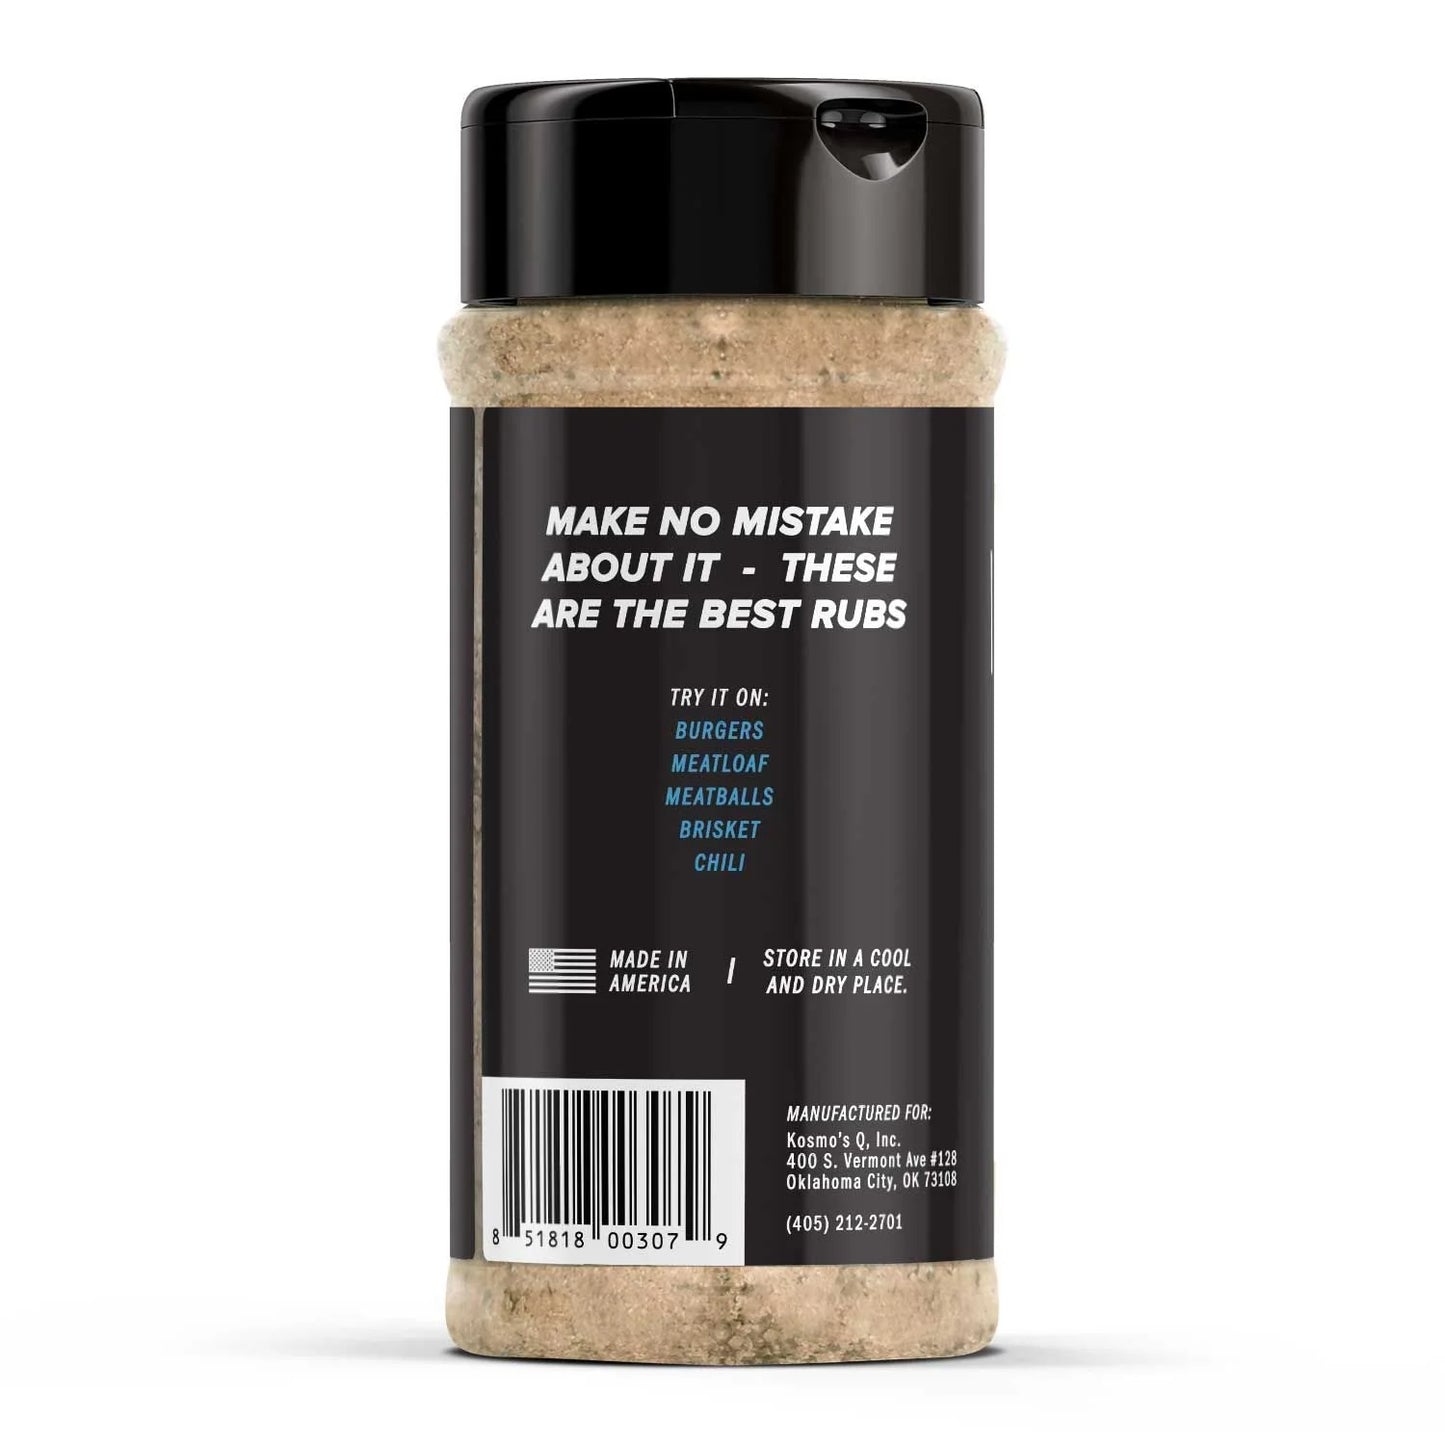 The Best Burger Rub is also amazing on burgers, meatloaf, meatballs, brisket and chili.